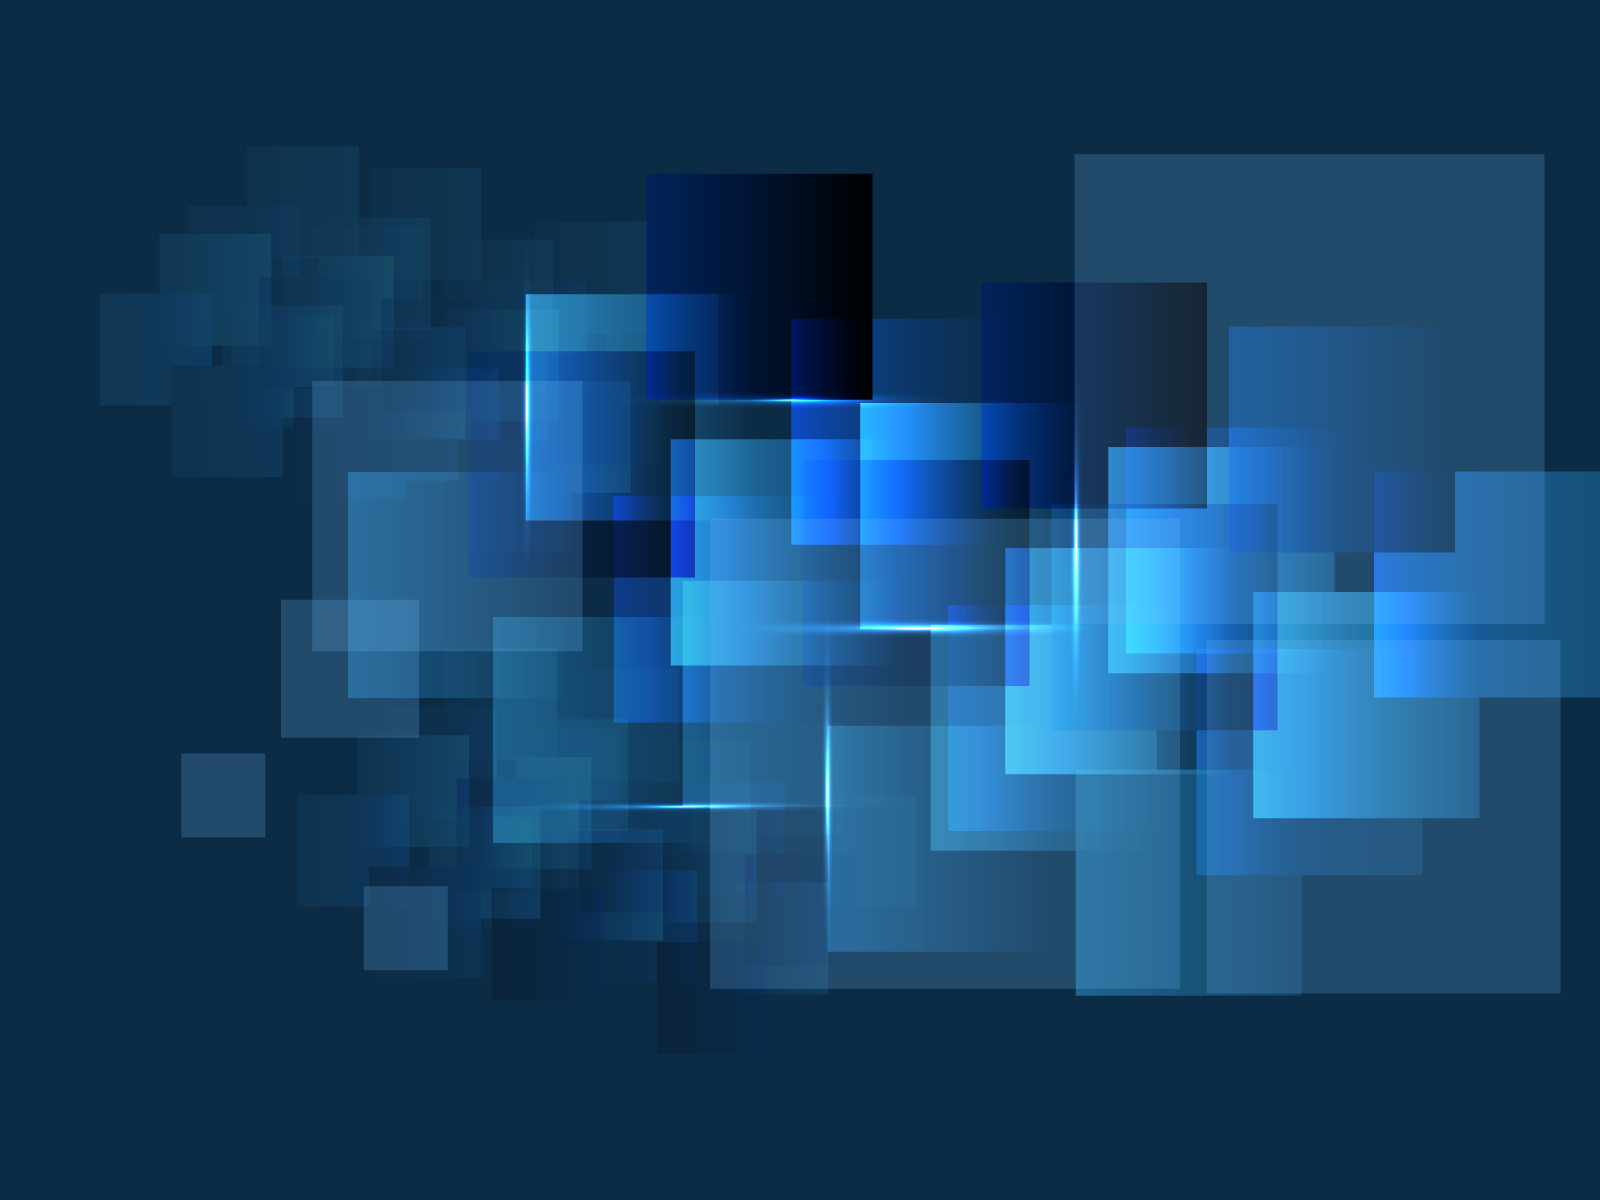 This art is abstract--slightly blurry overlapping squares in different shades of blue--on a dark blue background. This art is on the website of AML Partners. AML Partners designs RegTech platform software, AML software, KYC software, and more AML Compliance solutions and GRC tools.